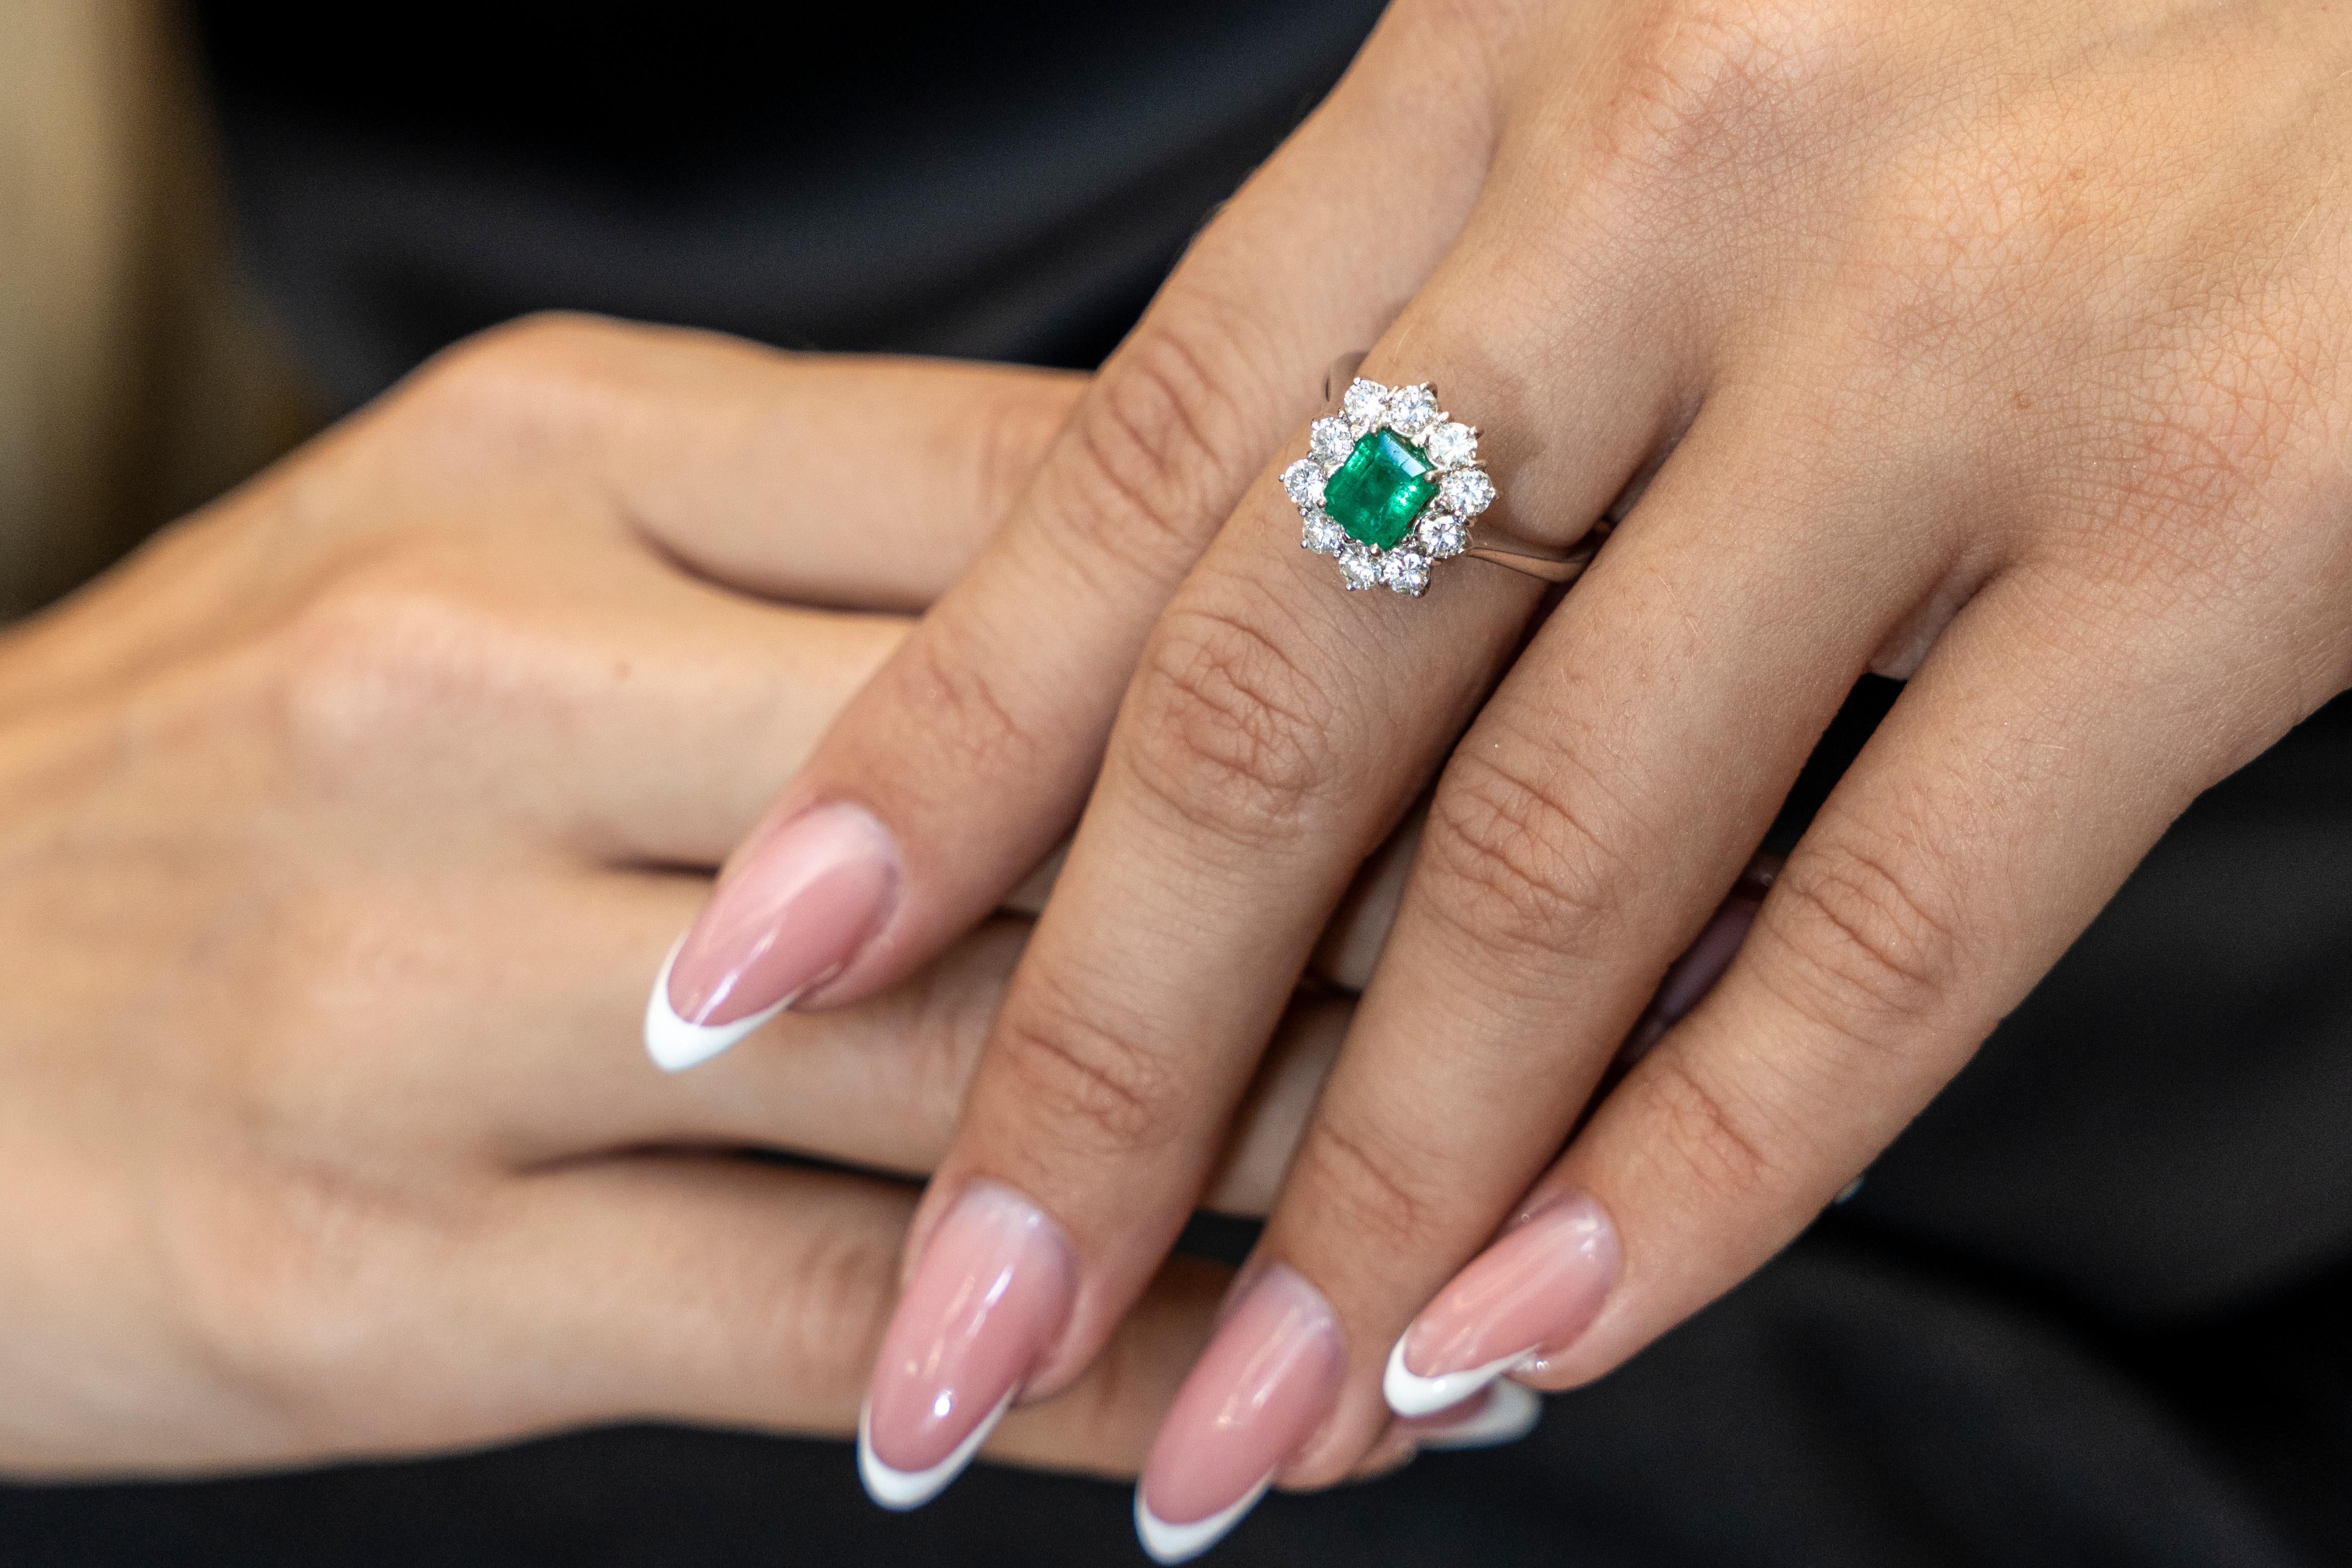 Contemporary 18 Karat White Gold Cushion Emerald Diamond Cocktail Ring For Sale